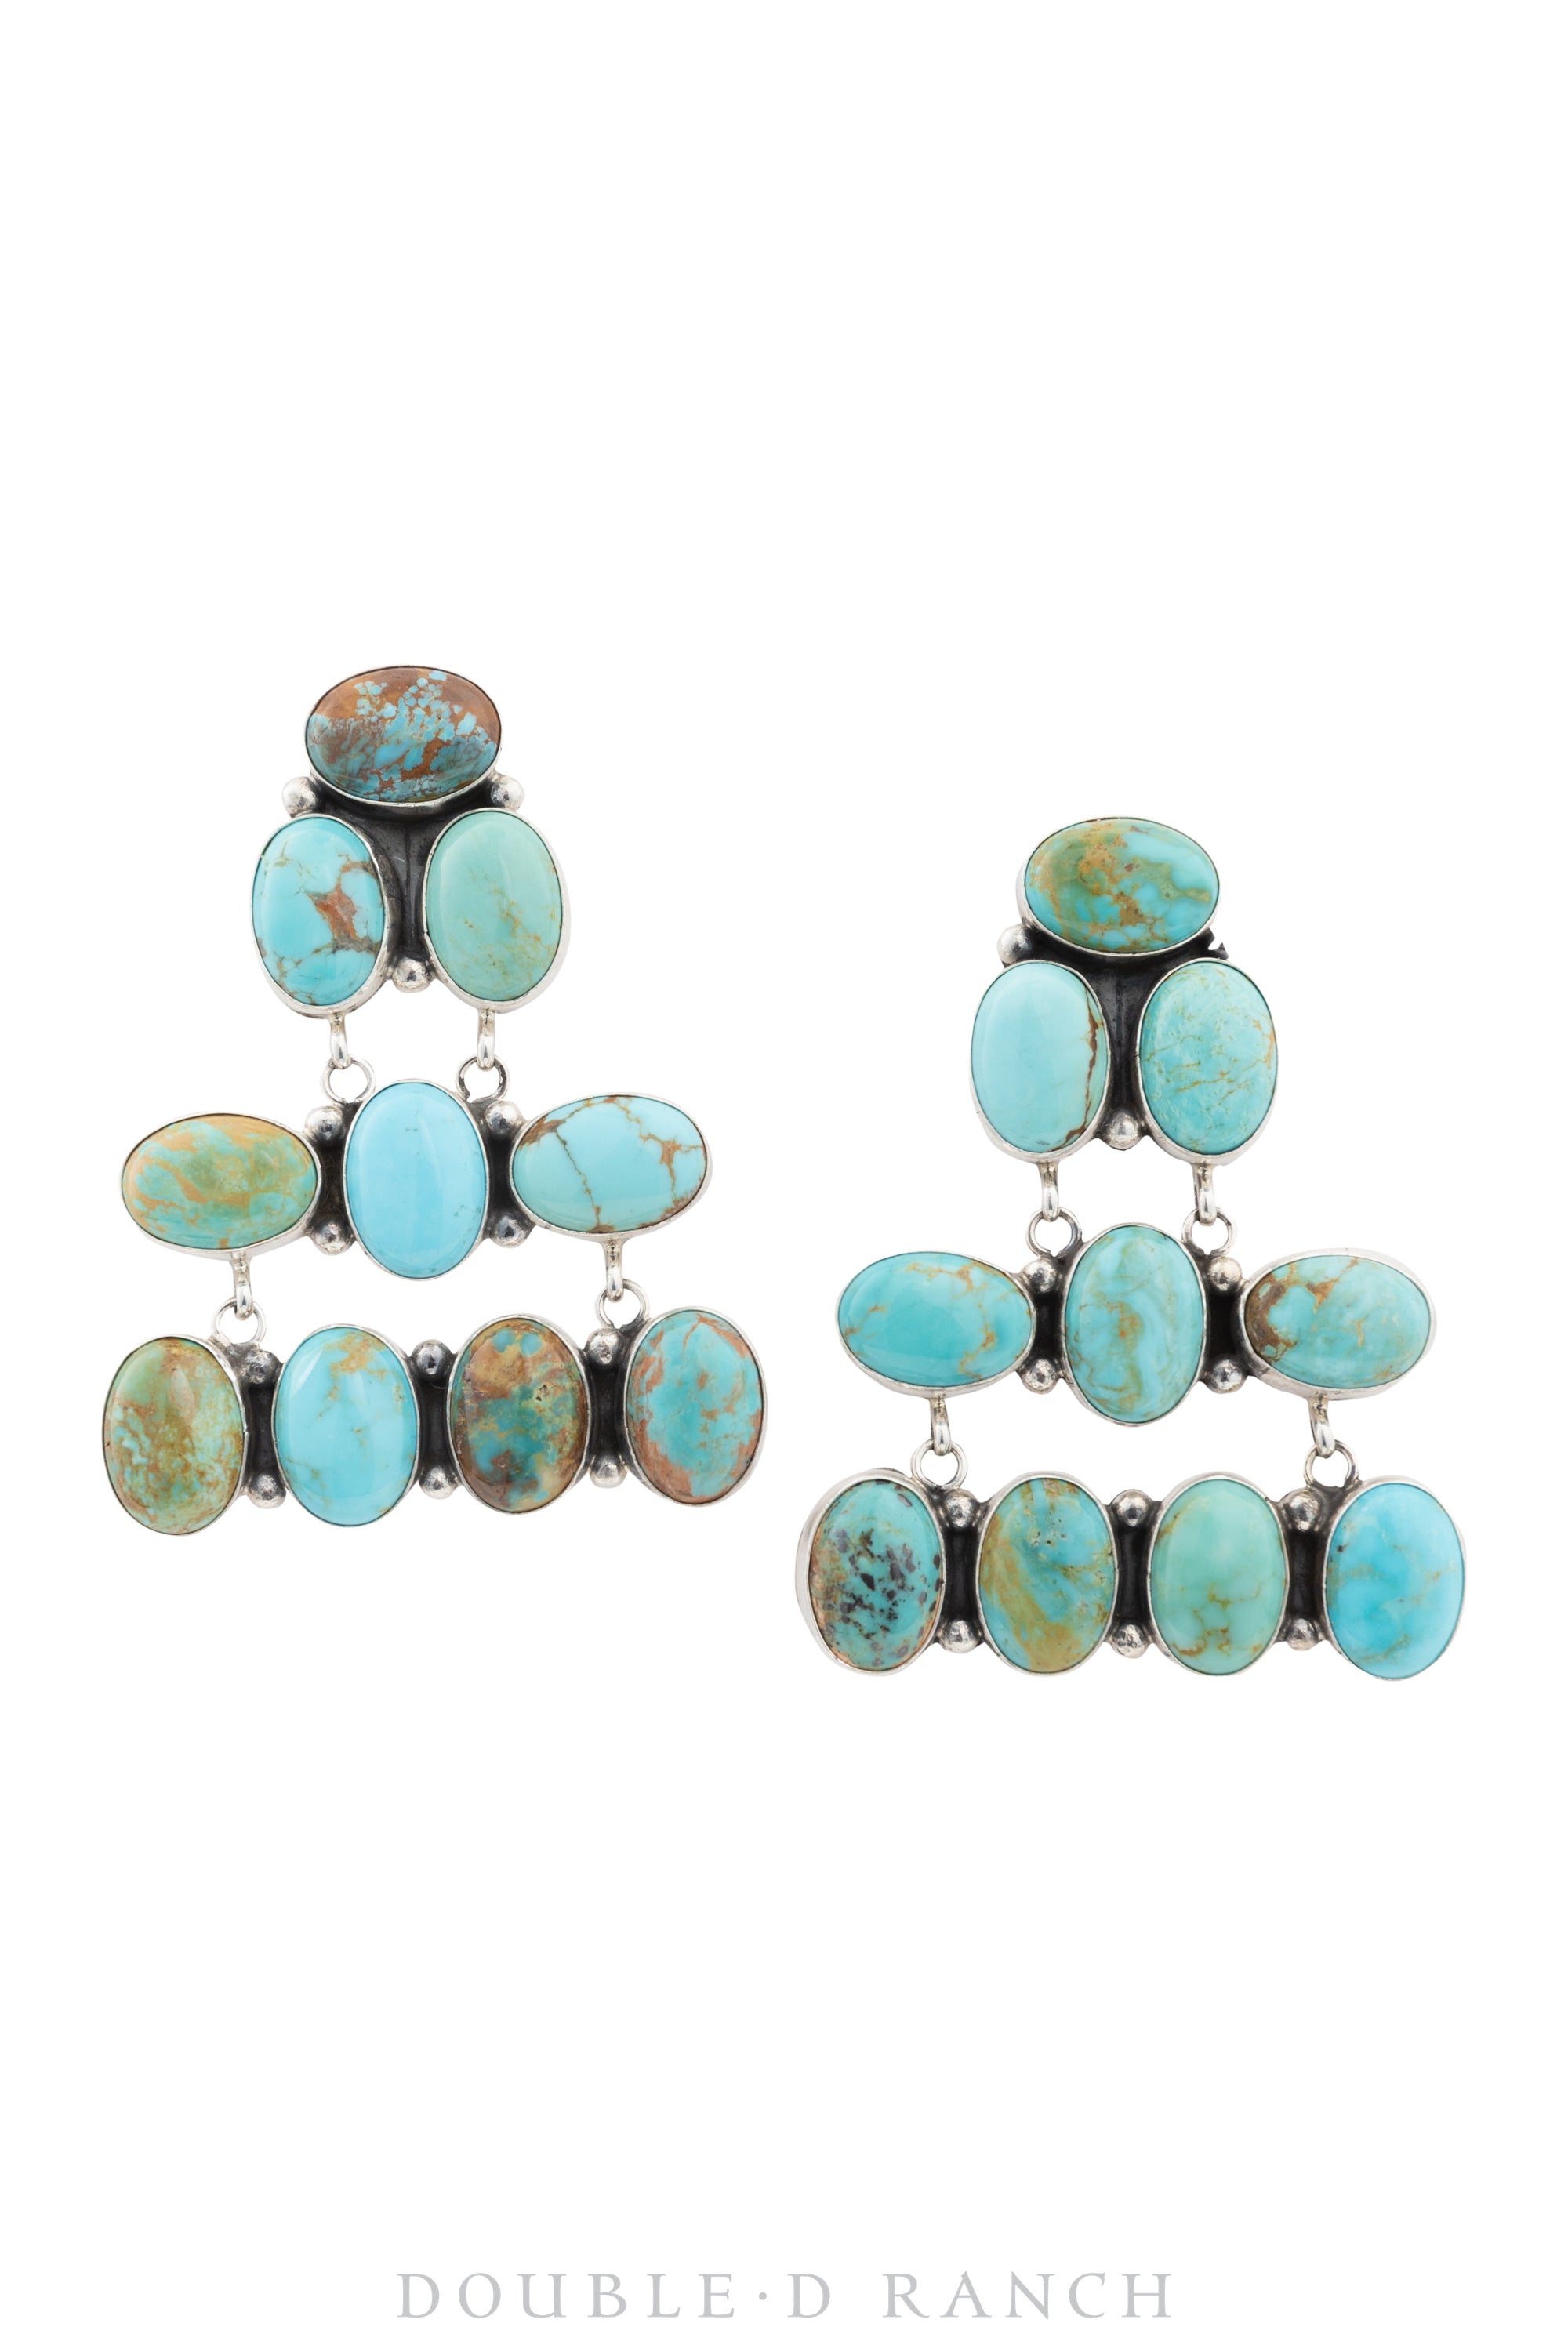 Earrings, Chandeliers, Turquoise, Hallmark, Contemporary, 1490